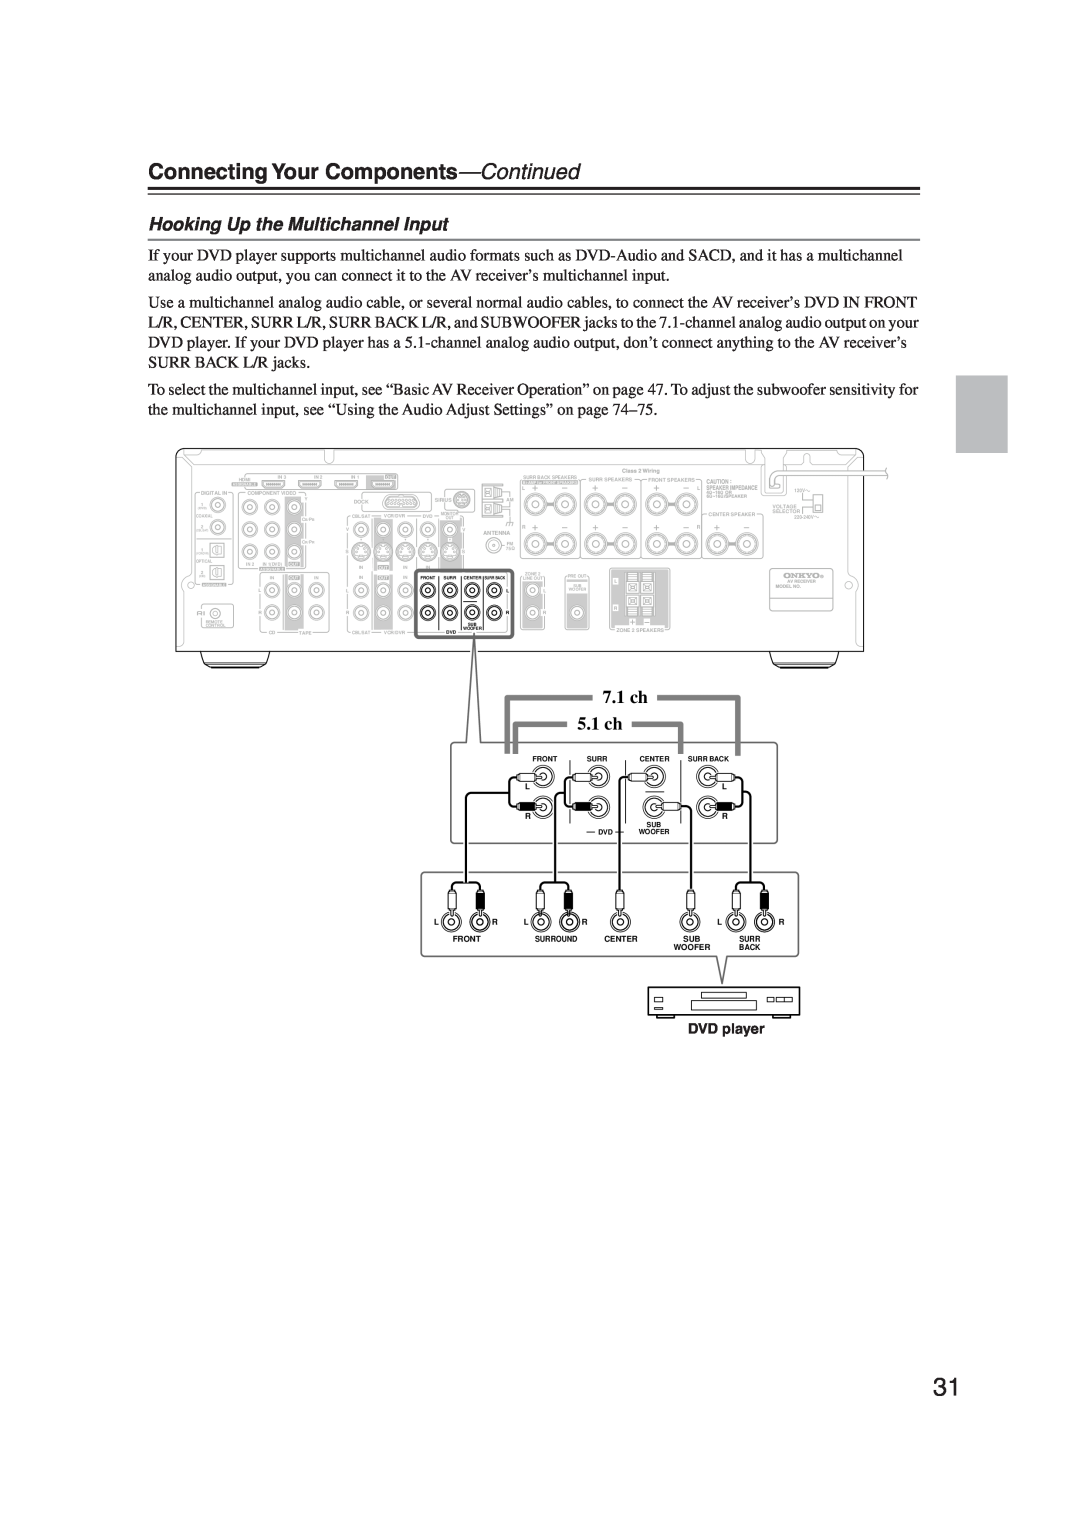 Onkyo S5100 instruction manual Hooking Up the Multichannel Input, Connecting Your Components-Continued, 7.1ch 5.1ch 